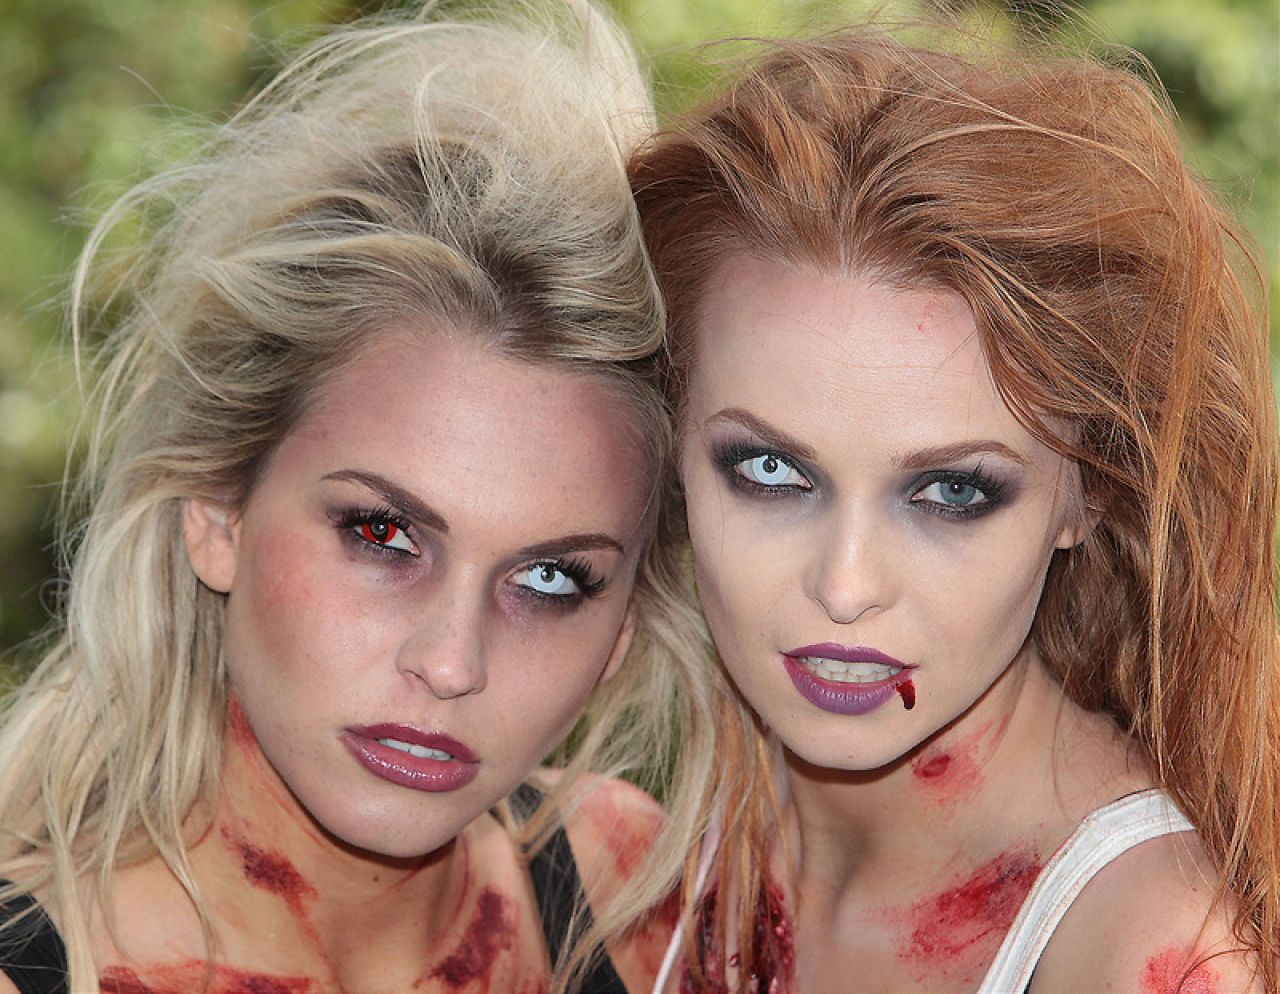 Models get Scary for Zombie Adventure Run - Entertainment.ie